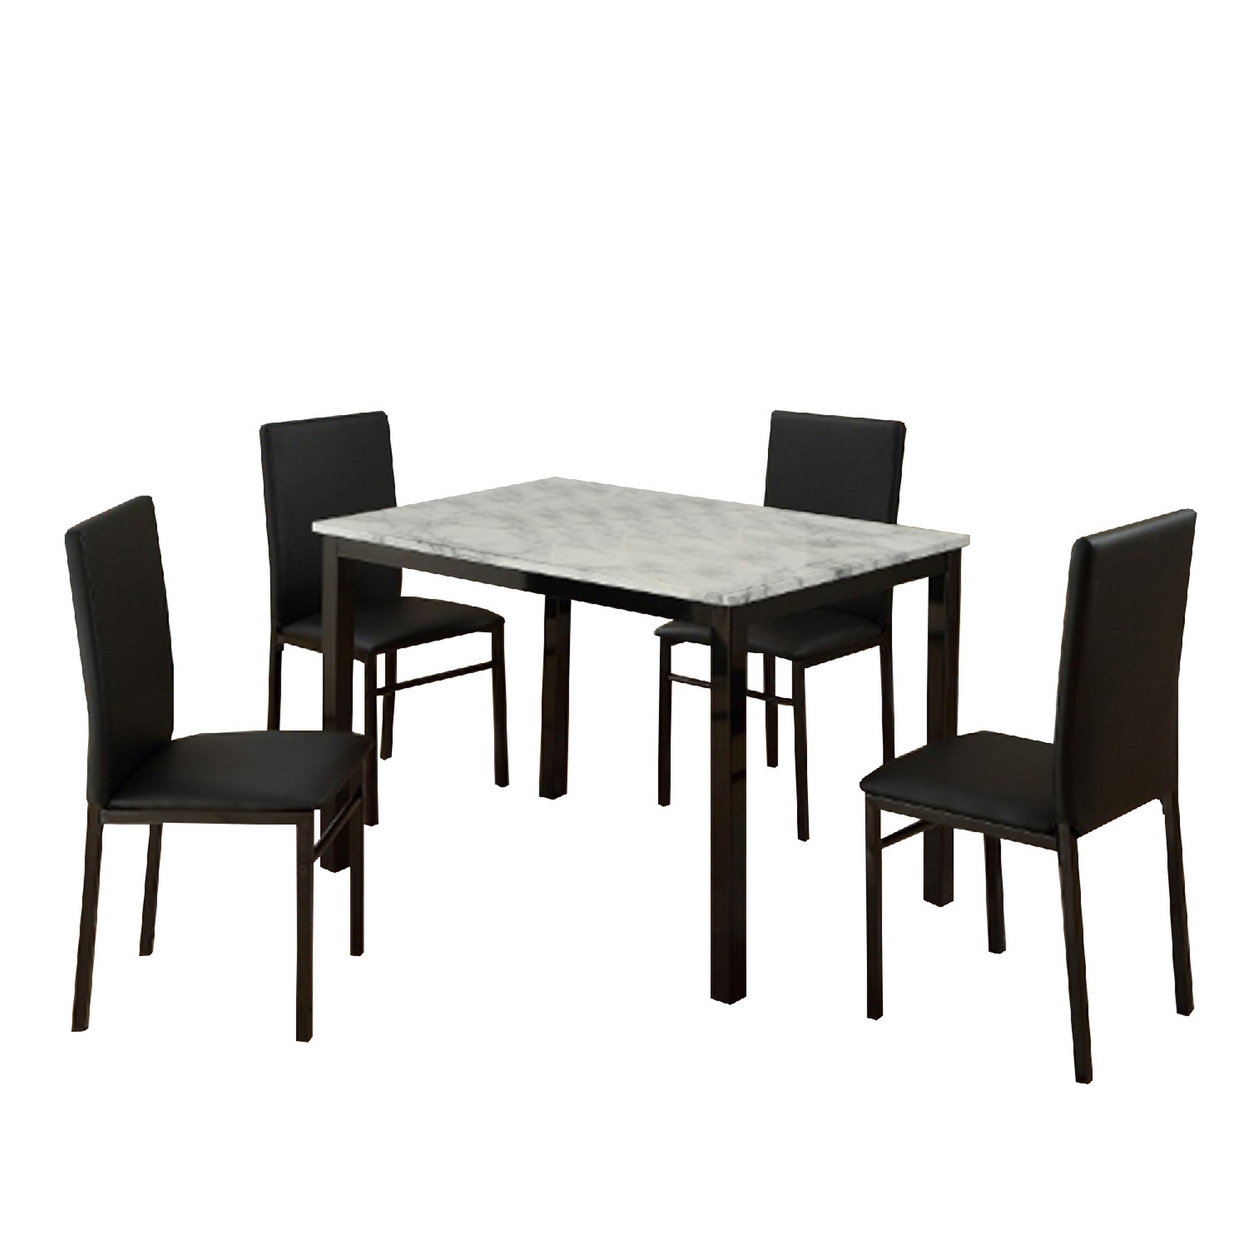 Riley 5 Piece Dining Table Set, Wood, 4 Chairs, White Fabric Upholstery -Saltoro Sherpi